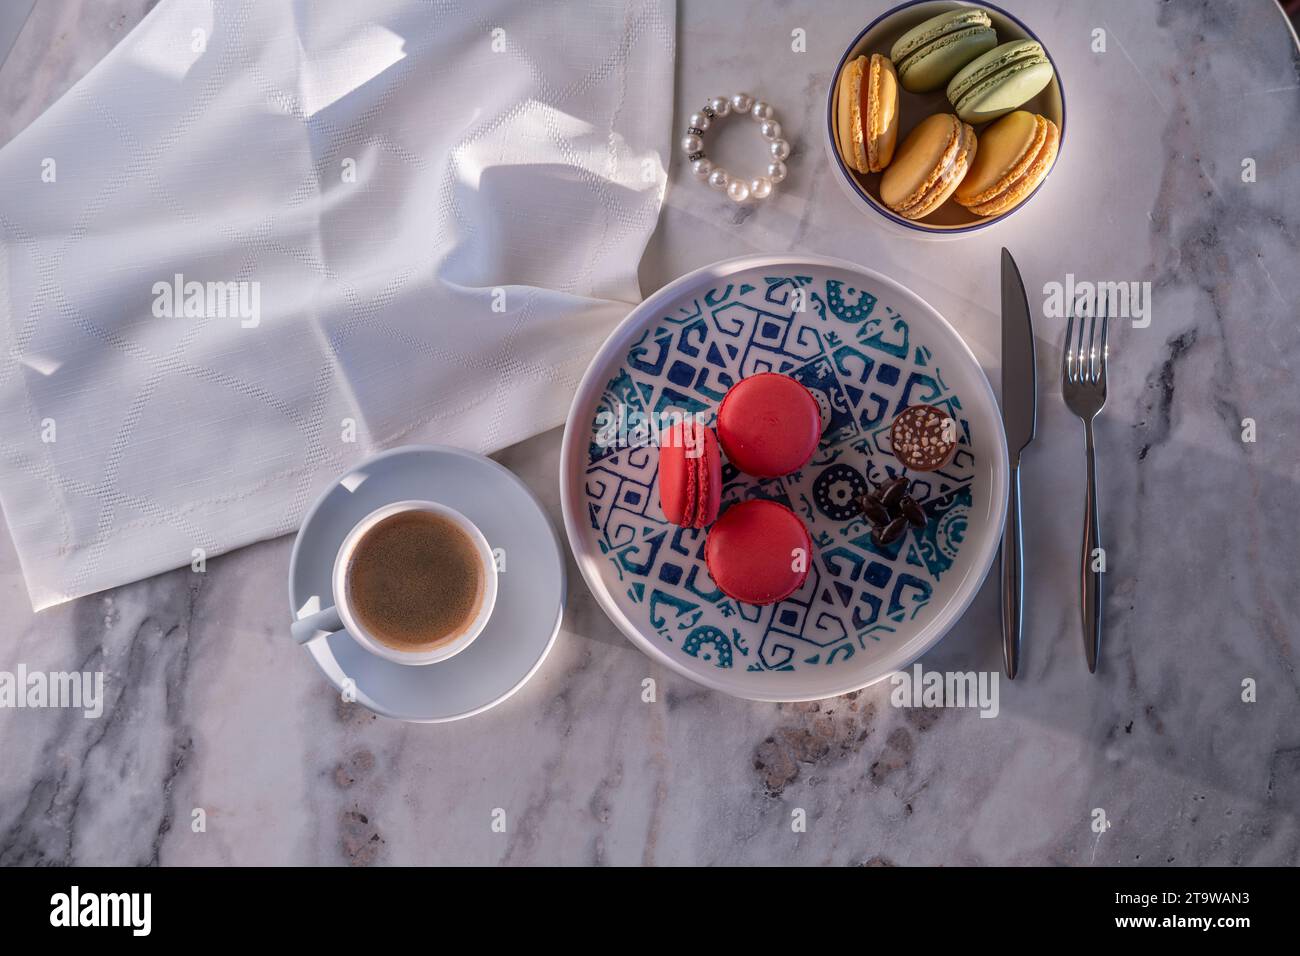 Colorful macarons and filter coffee on a blue plate Stock Photo